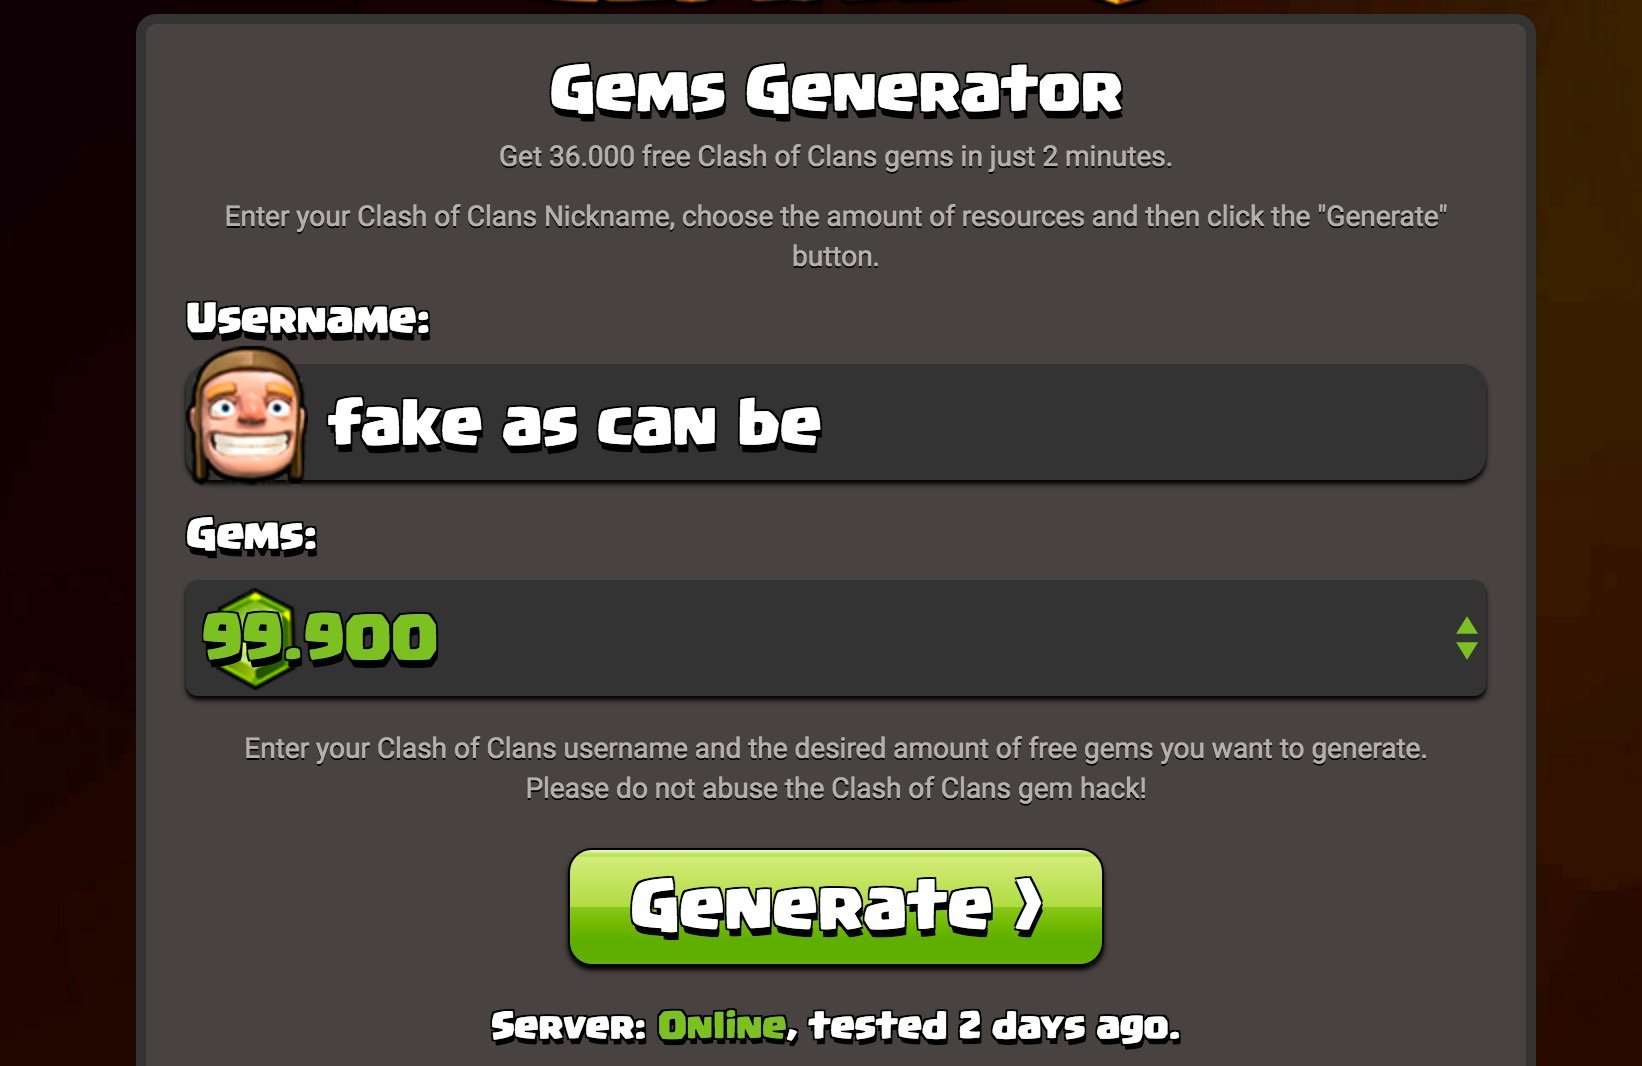 Watch out for the consequences of using Clash of Clans bots and mods.